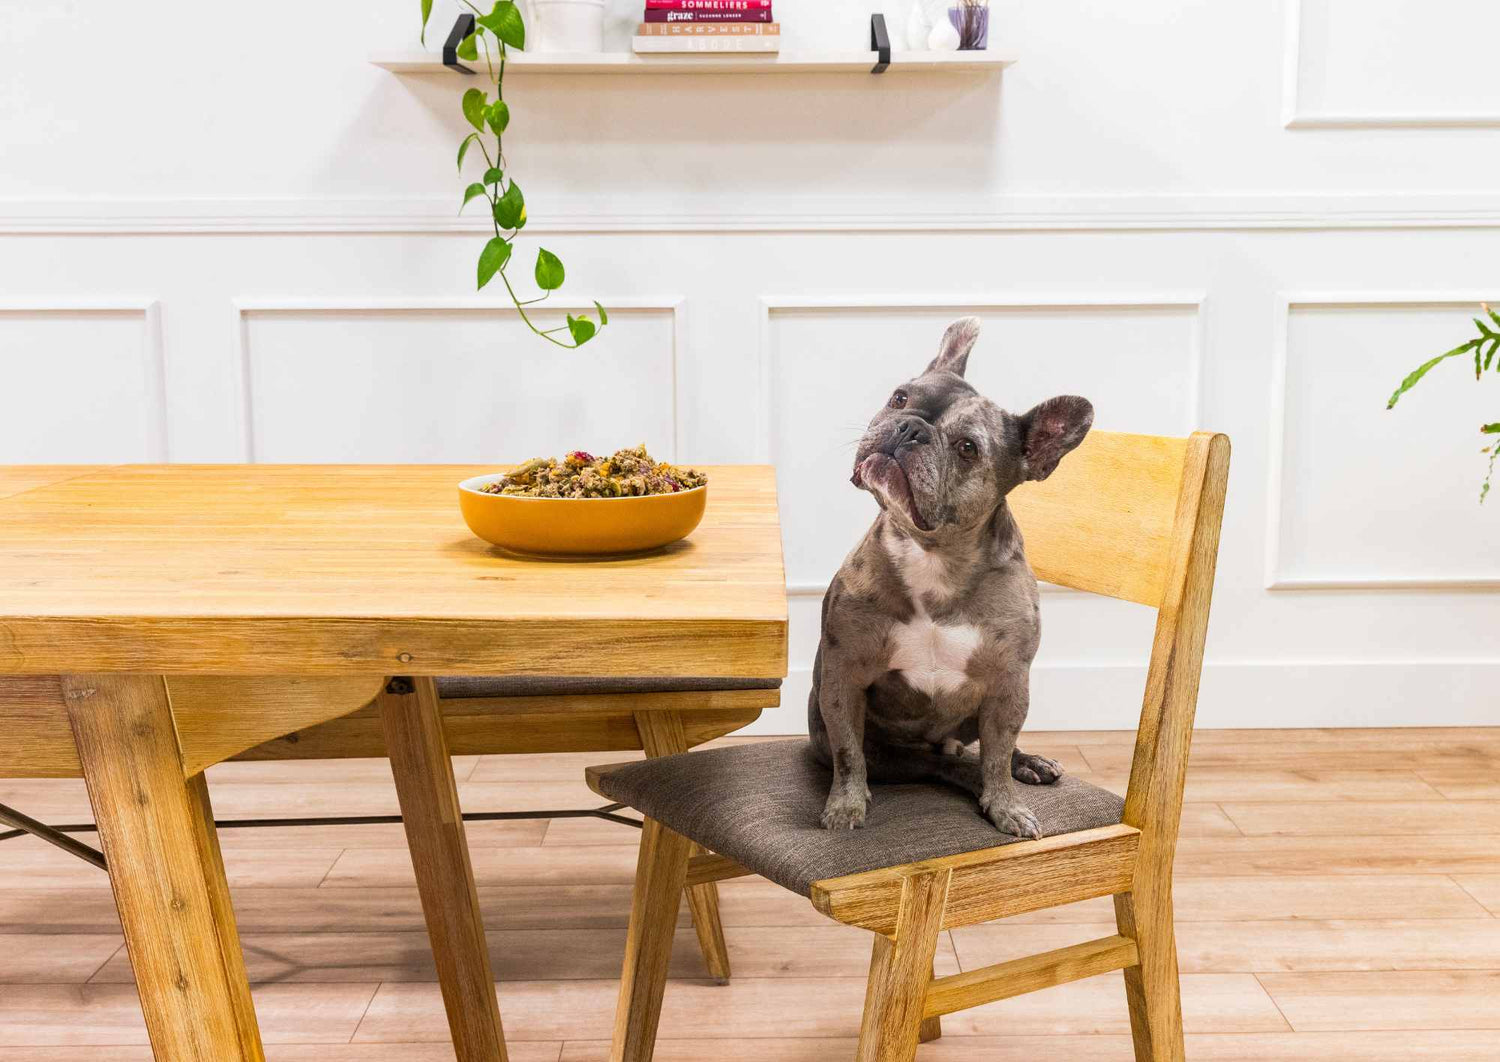 Frenchie sitting on chair with Zuel meal on table